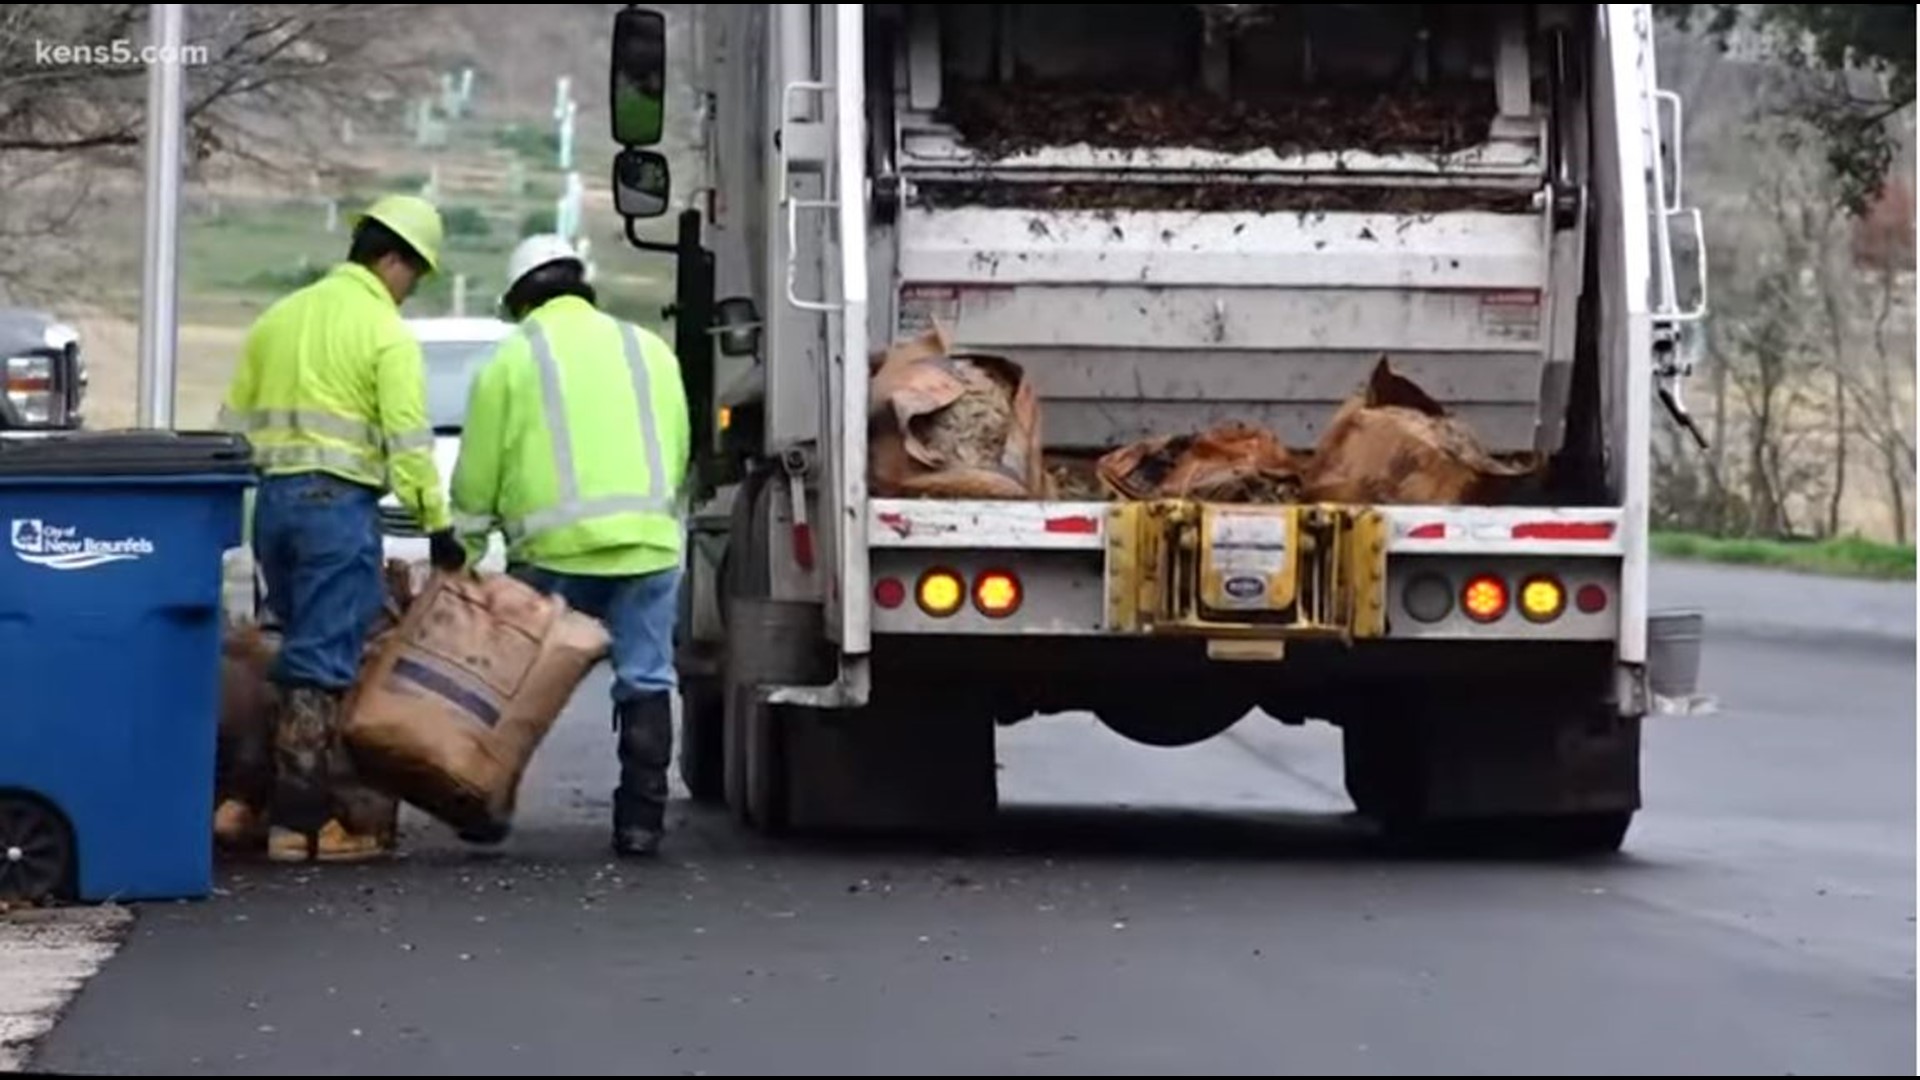 The law, meant to help minimize city employees often on the roads, also applies to trash and recycling collectors.